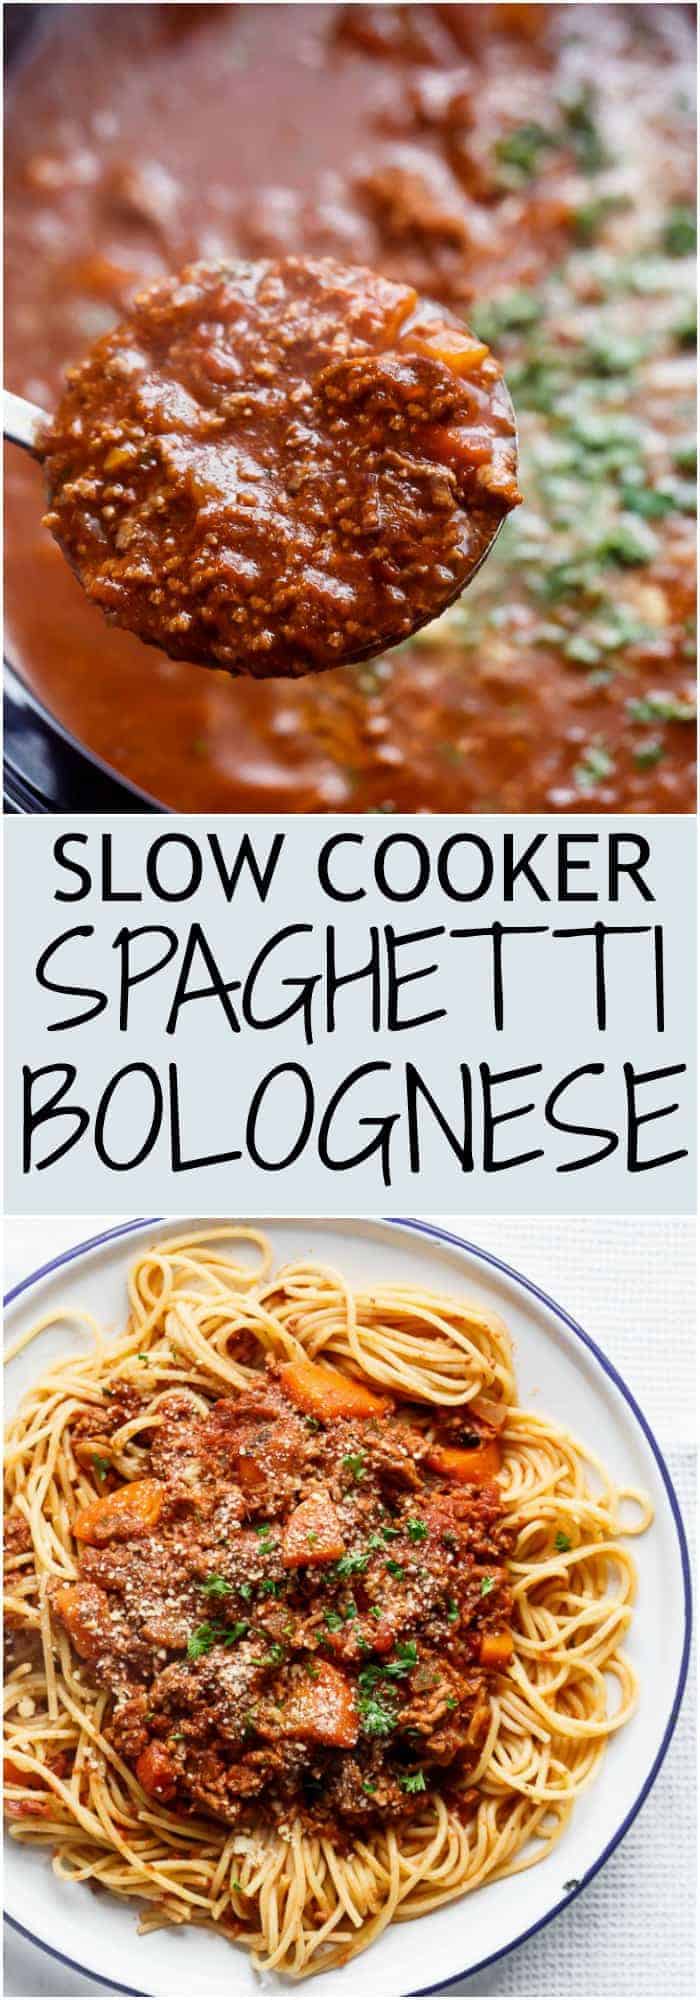 Easy to make rich and rustic Slow Cooker Bolognese Sauce, packed with so much flavour to coat your pasta (or vegetables) of choice! | https://cafedelites.com